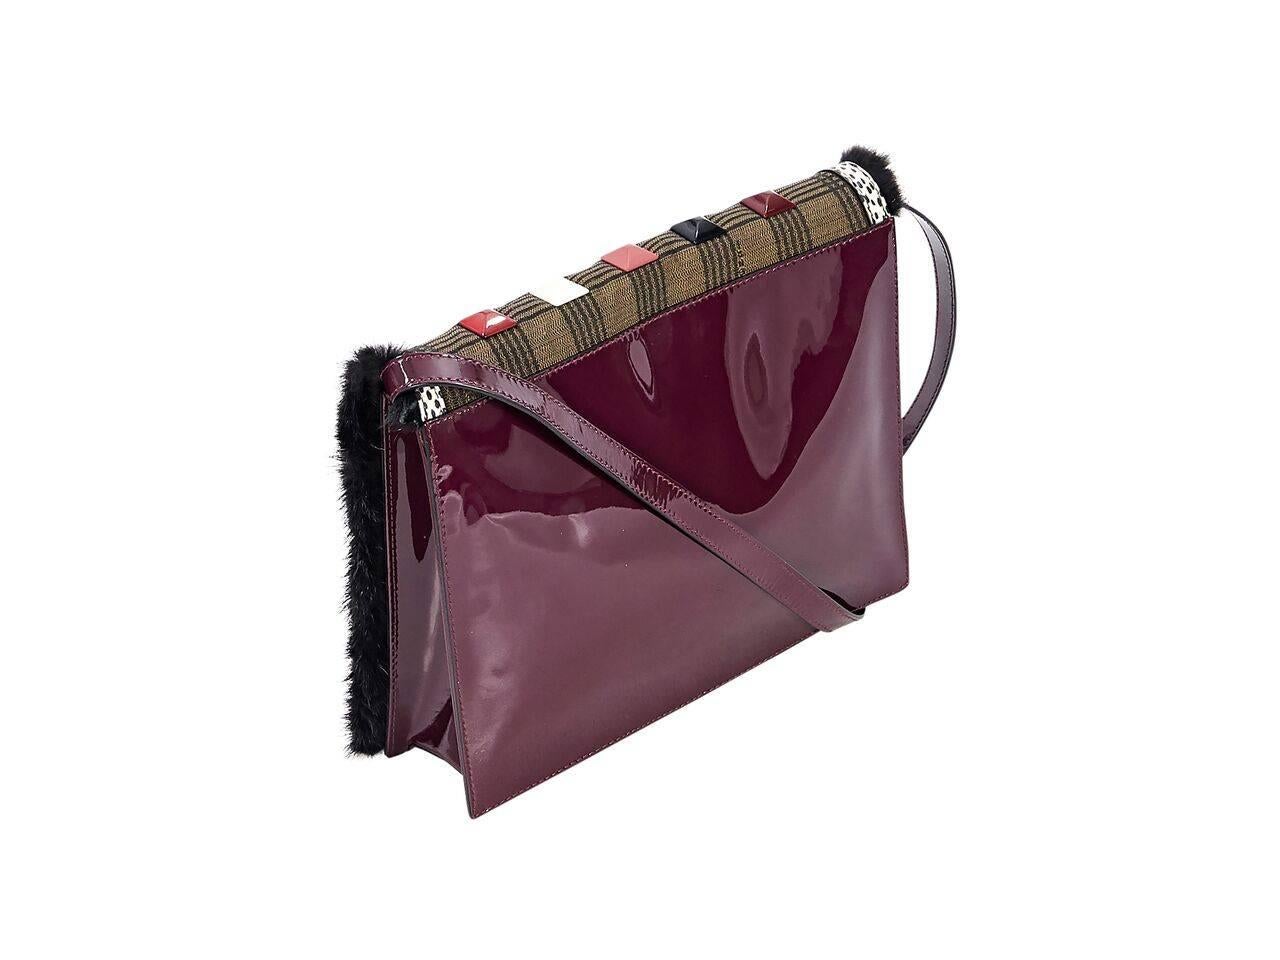 Product details:  Burgundy patent leather crossbody bag by Fendi.  Trimmed with black mink fur.  Adjustable, detachable crossbody strap.  Pyramid studded front flap.  Magnetic snap closure.  Lined interior with inner zip pocket.  Goldtone hardware. 